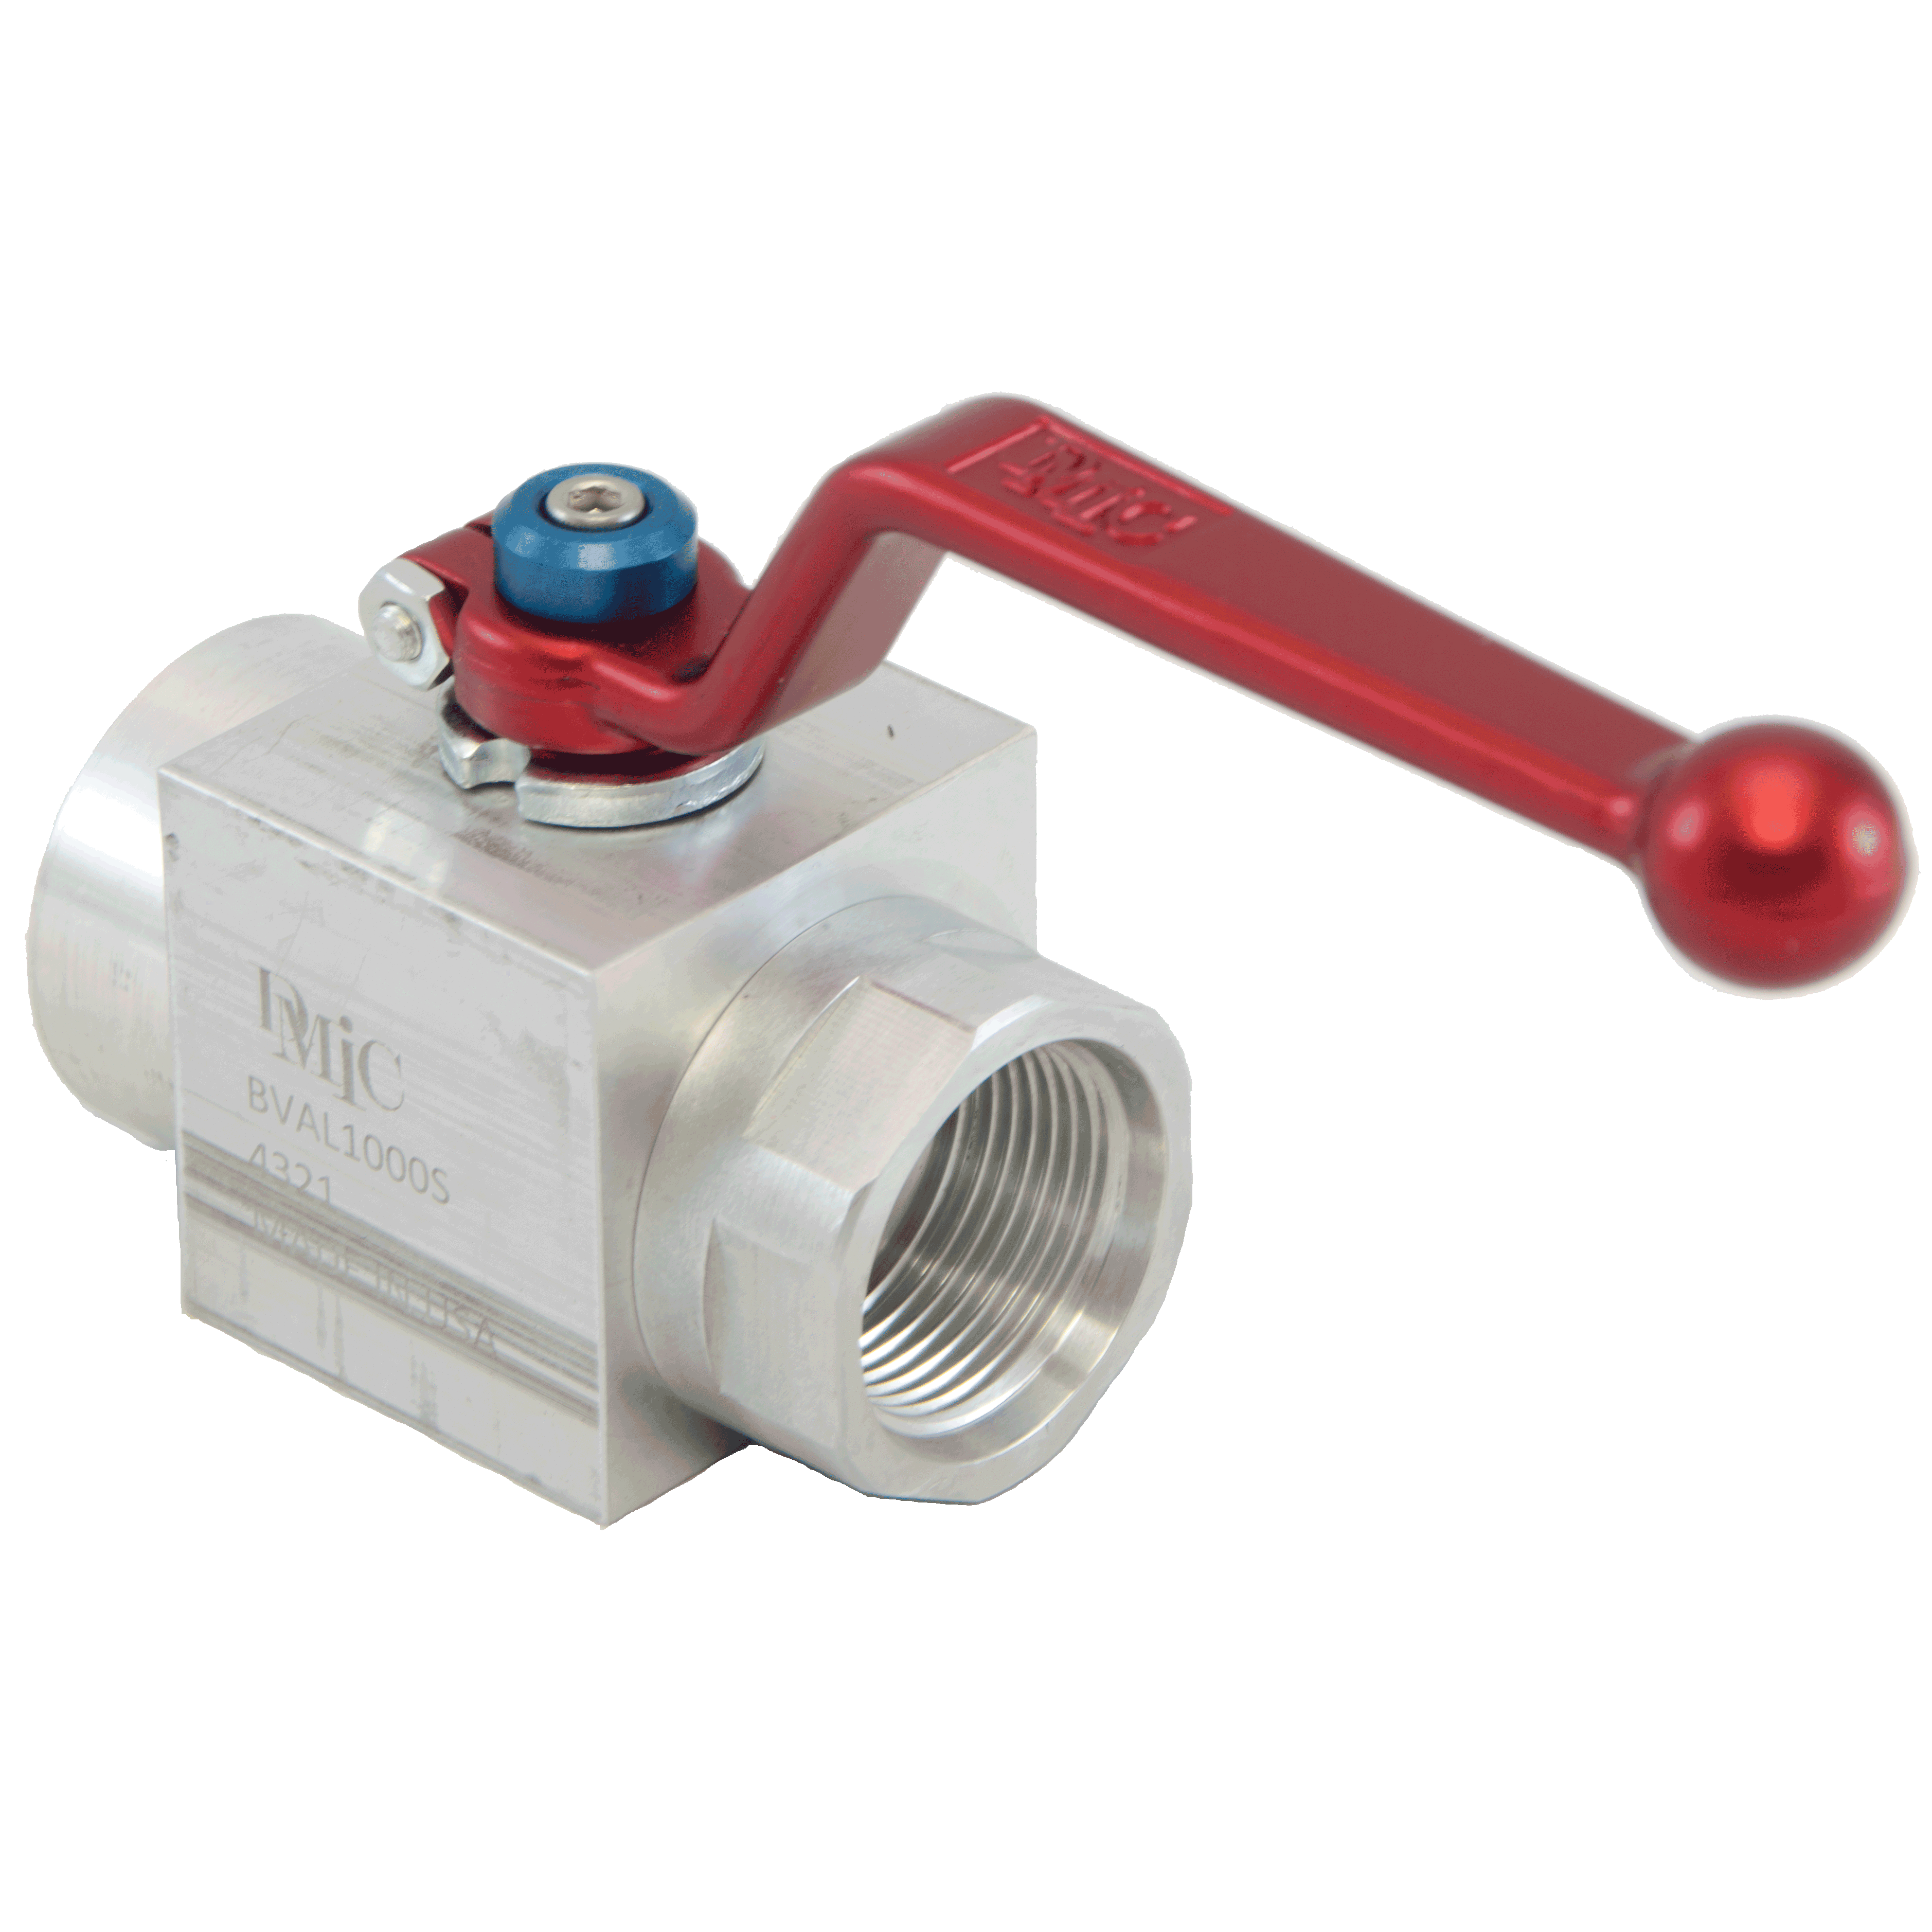 BVAL-4000N-4321 : DMIC Suction Ball Valve, 4 NPT, Aluminum, 400psi, Two-Way